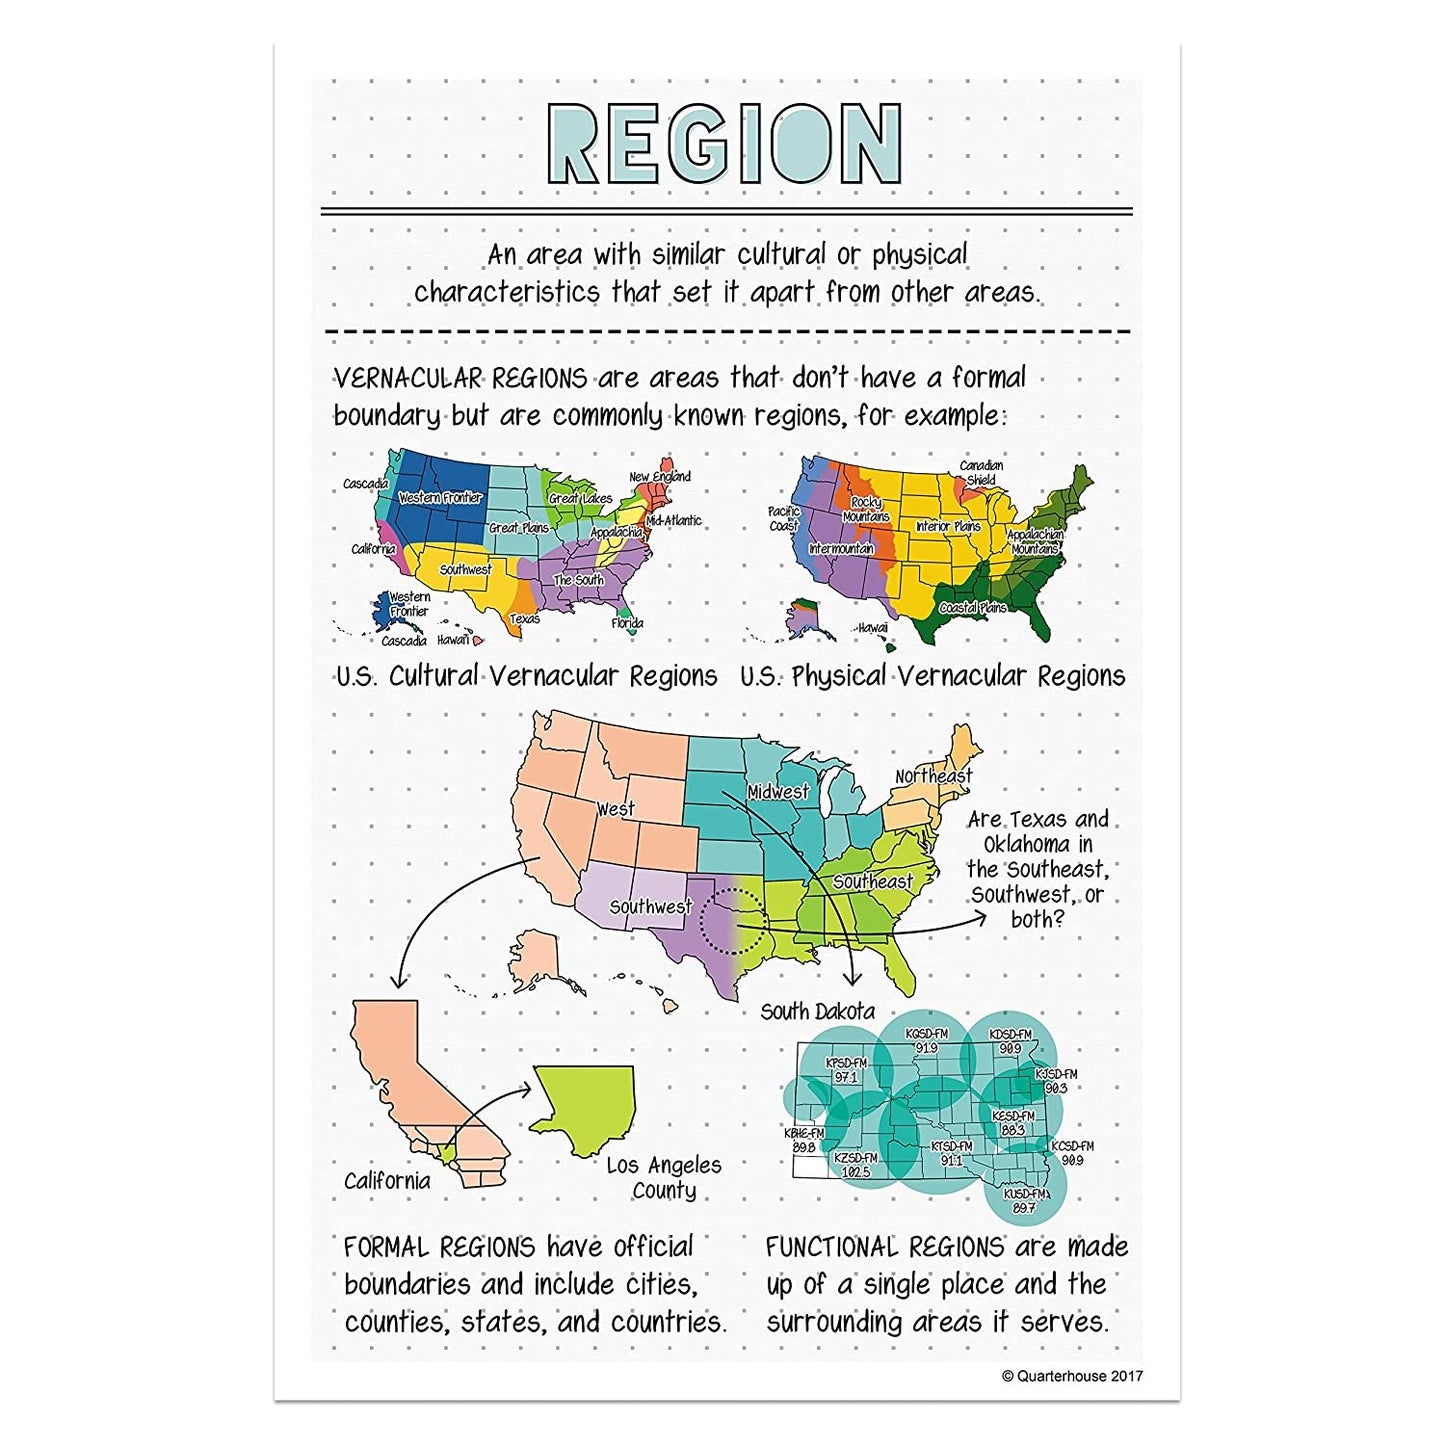 Quarterhouse 5 Themes of Geography Poster Set, Social Studies Classroom Learning Materials for K-12 Students and Teachers, Set of 6, 12 x 18 Inches, Extra Durable